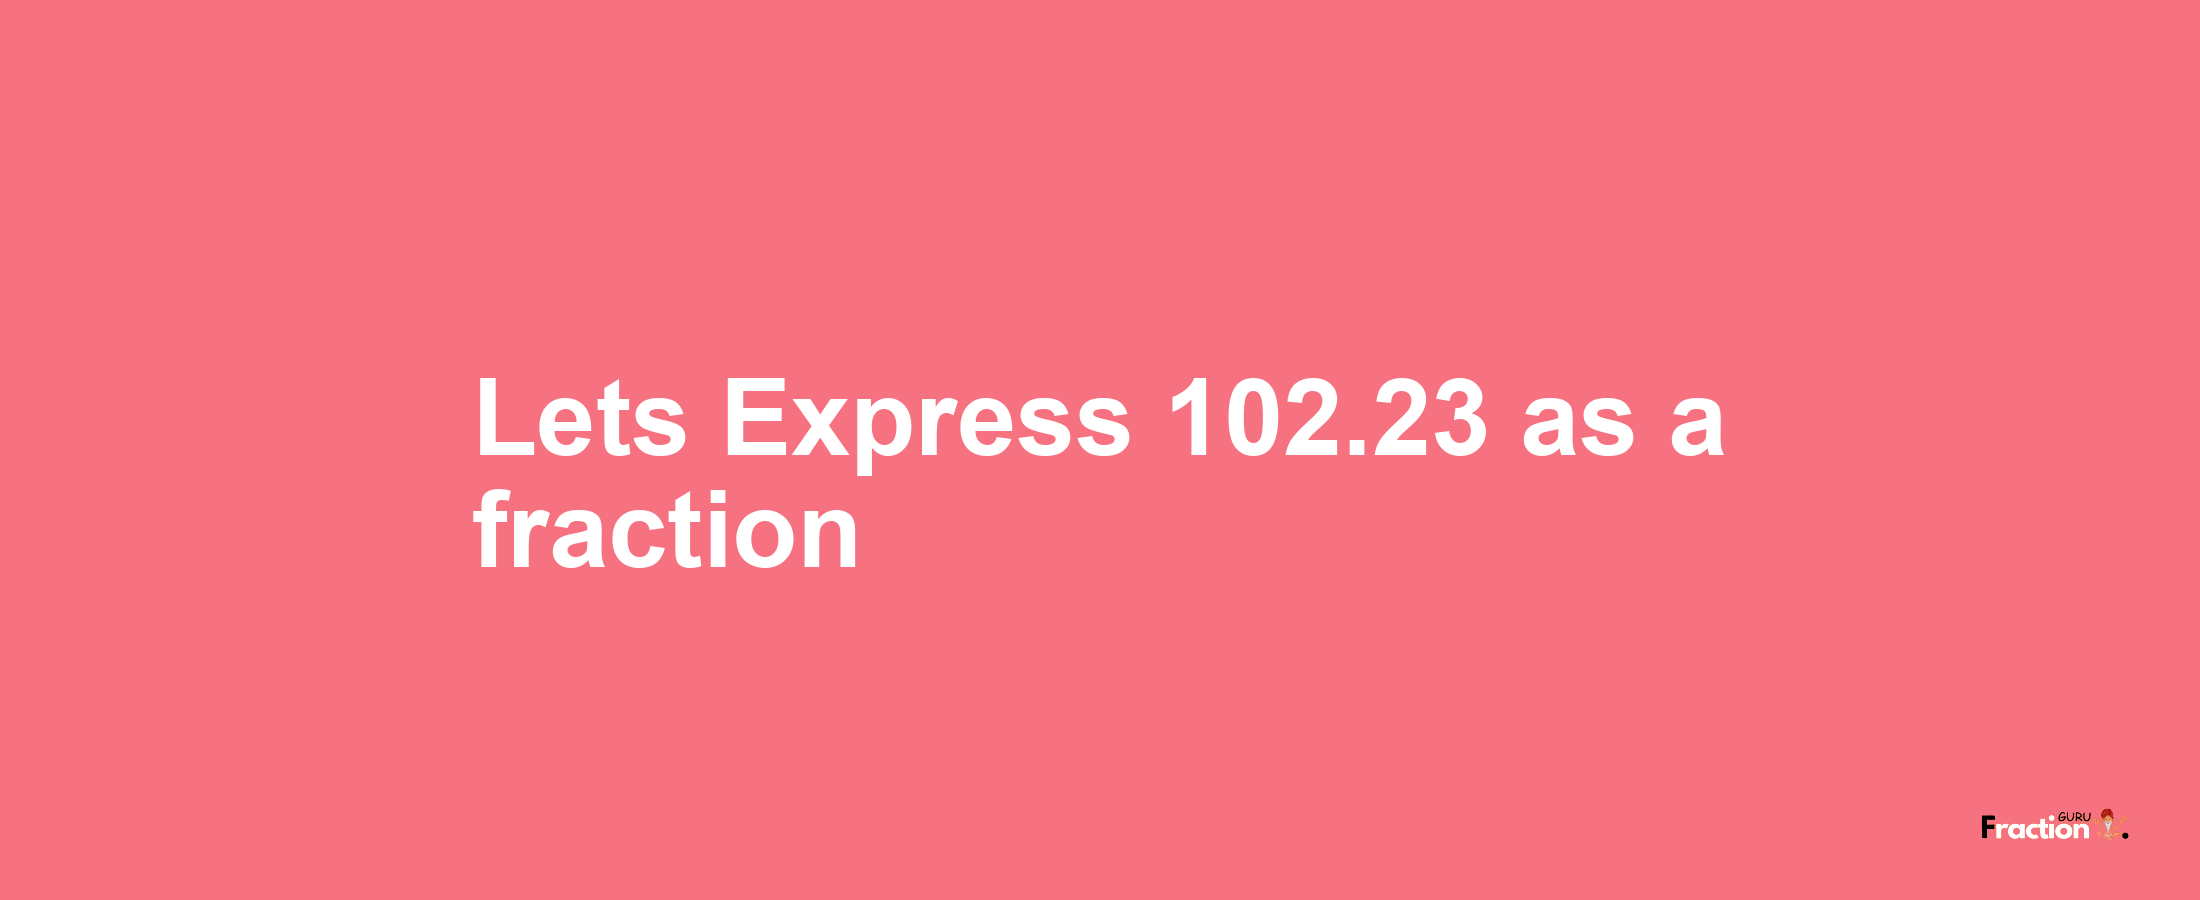 Lets Express 102.23 as afraction